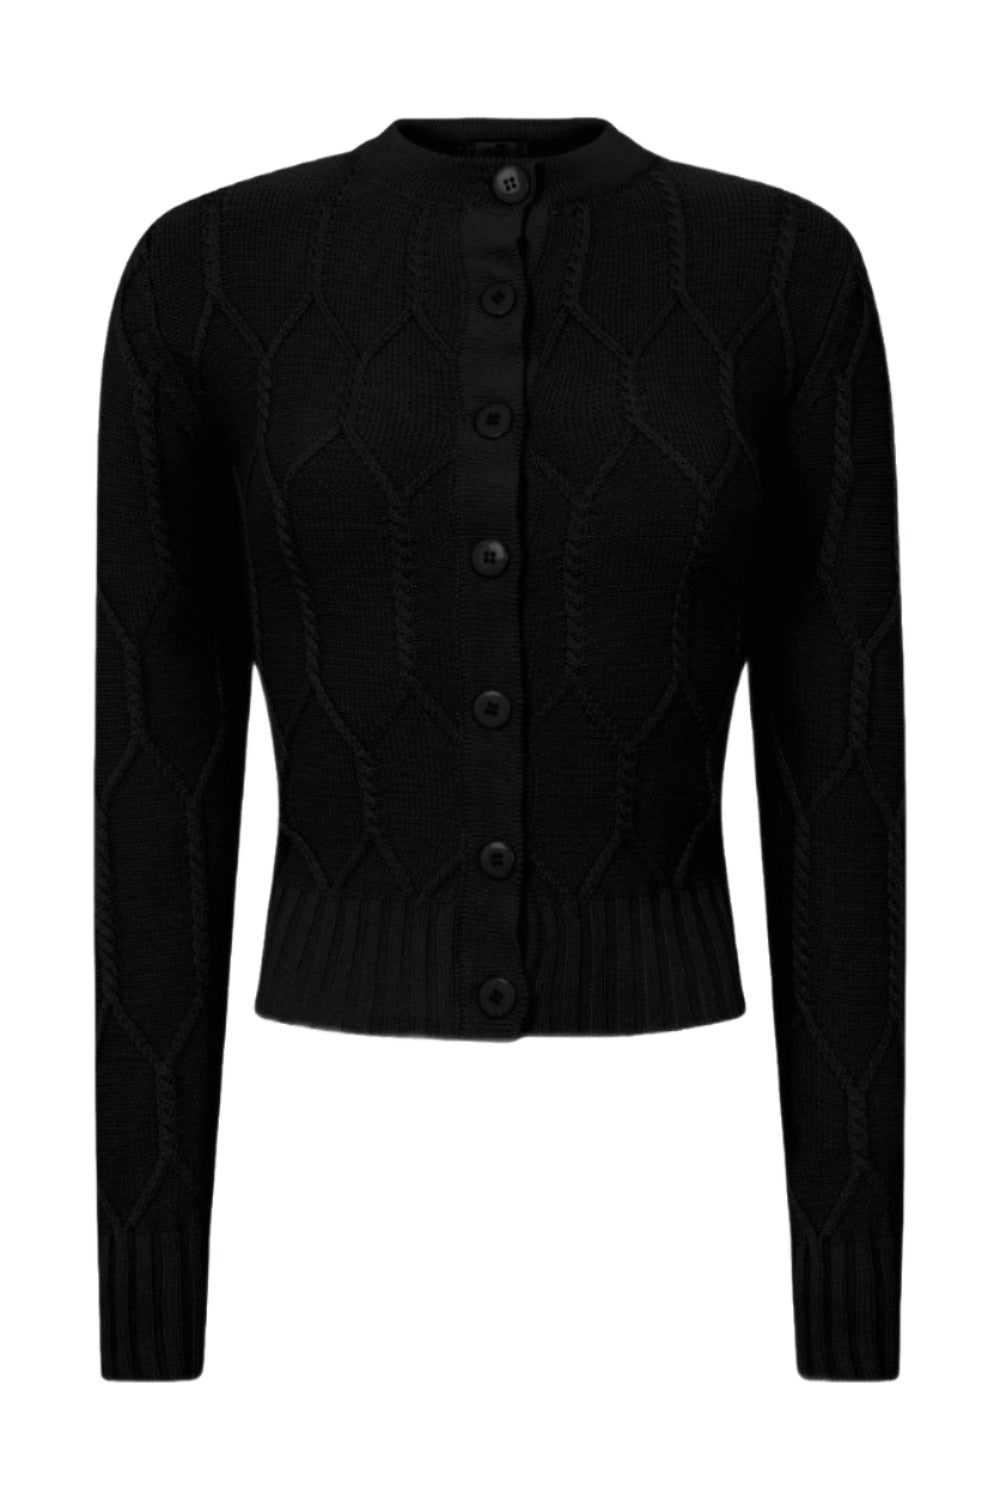 Banned Apparel Cable Knit Black Cardigan